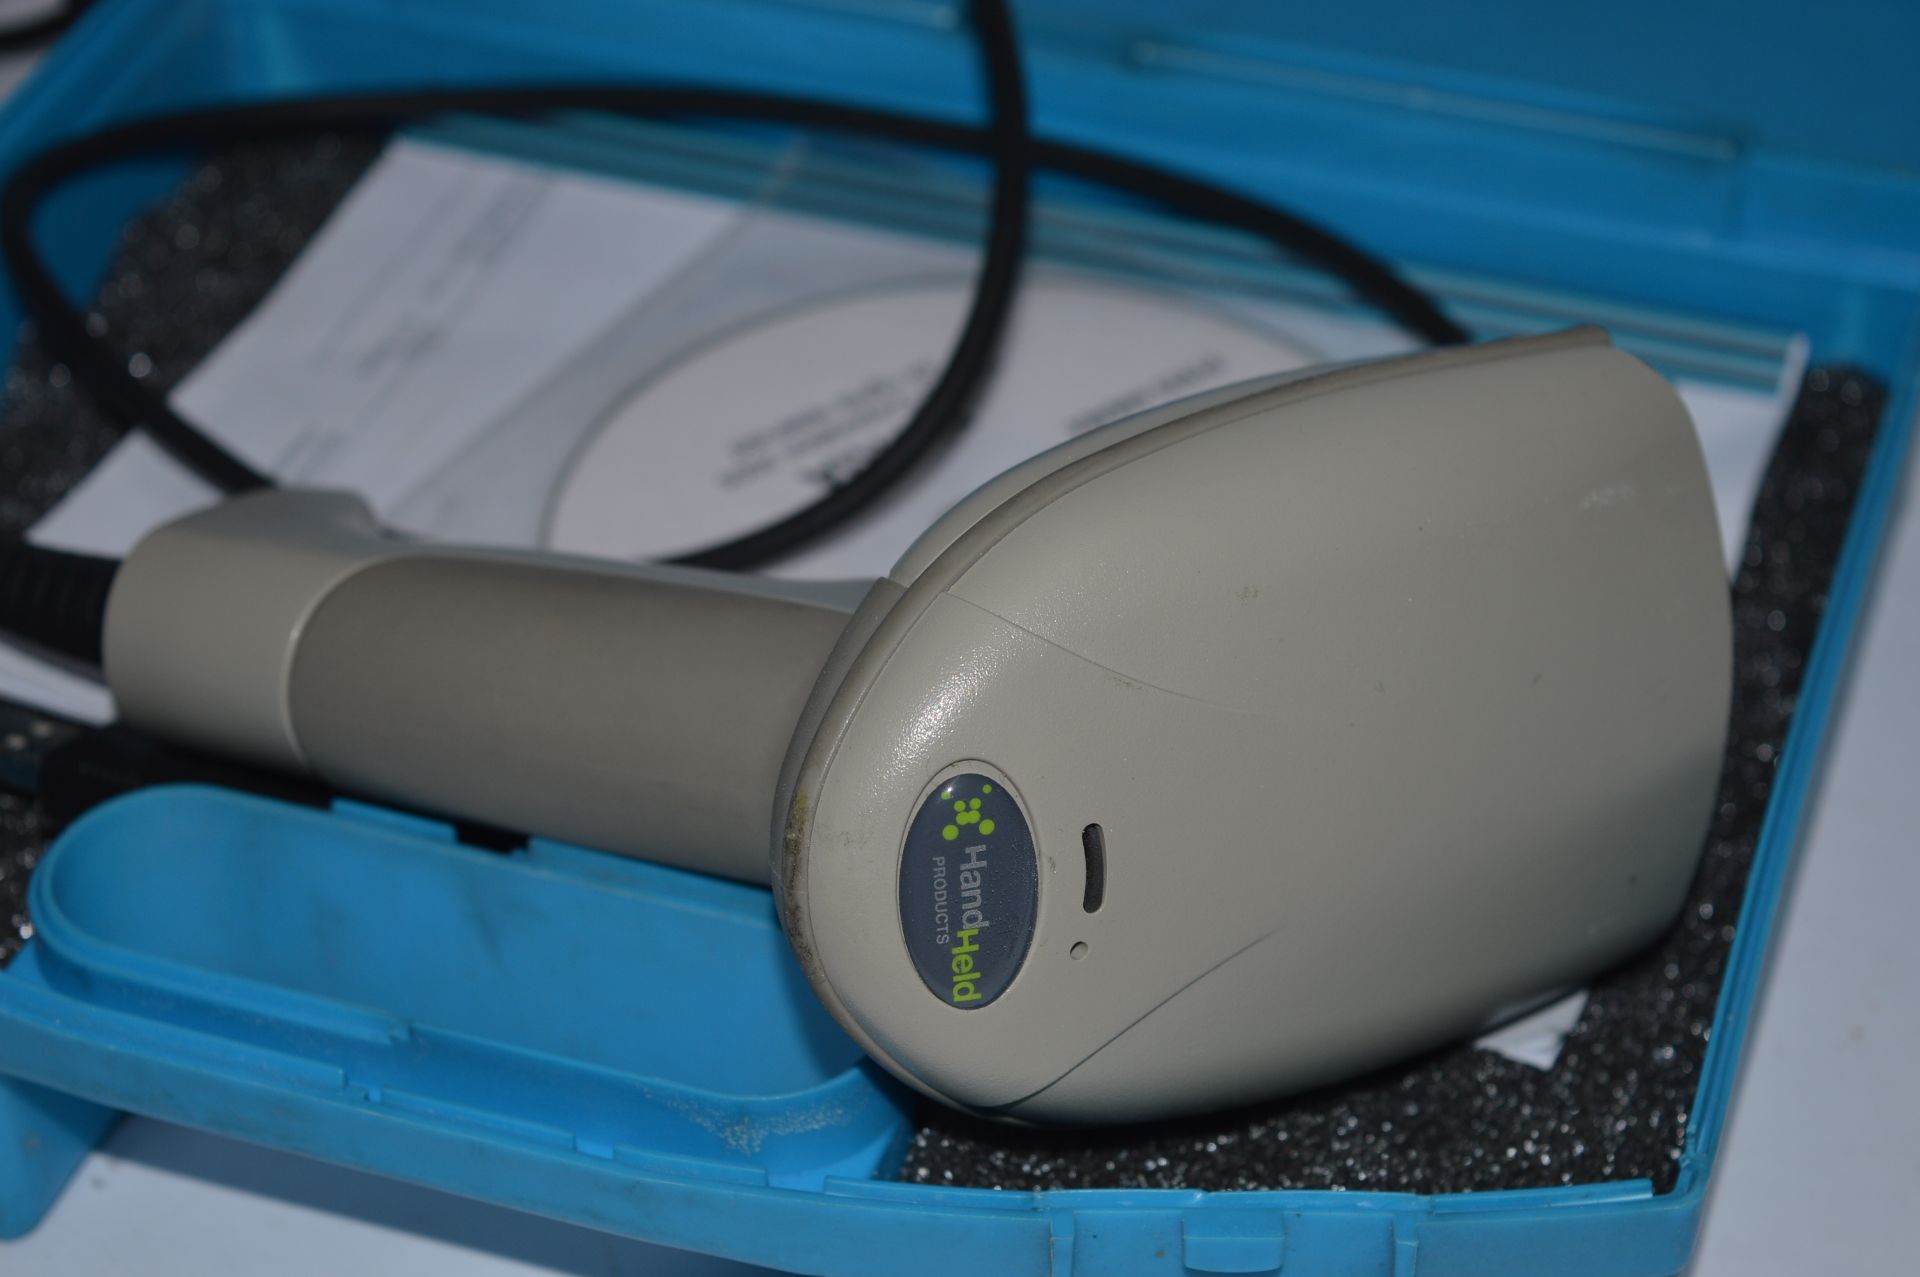 1 x HHP IT3800 Handheld USB Barcode Scanner With Carry Case and Nokia NtraScanner Software Disk - Image 3 of 10